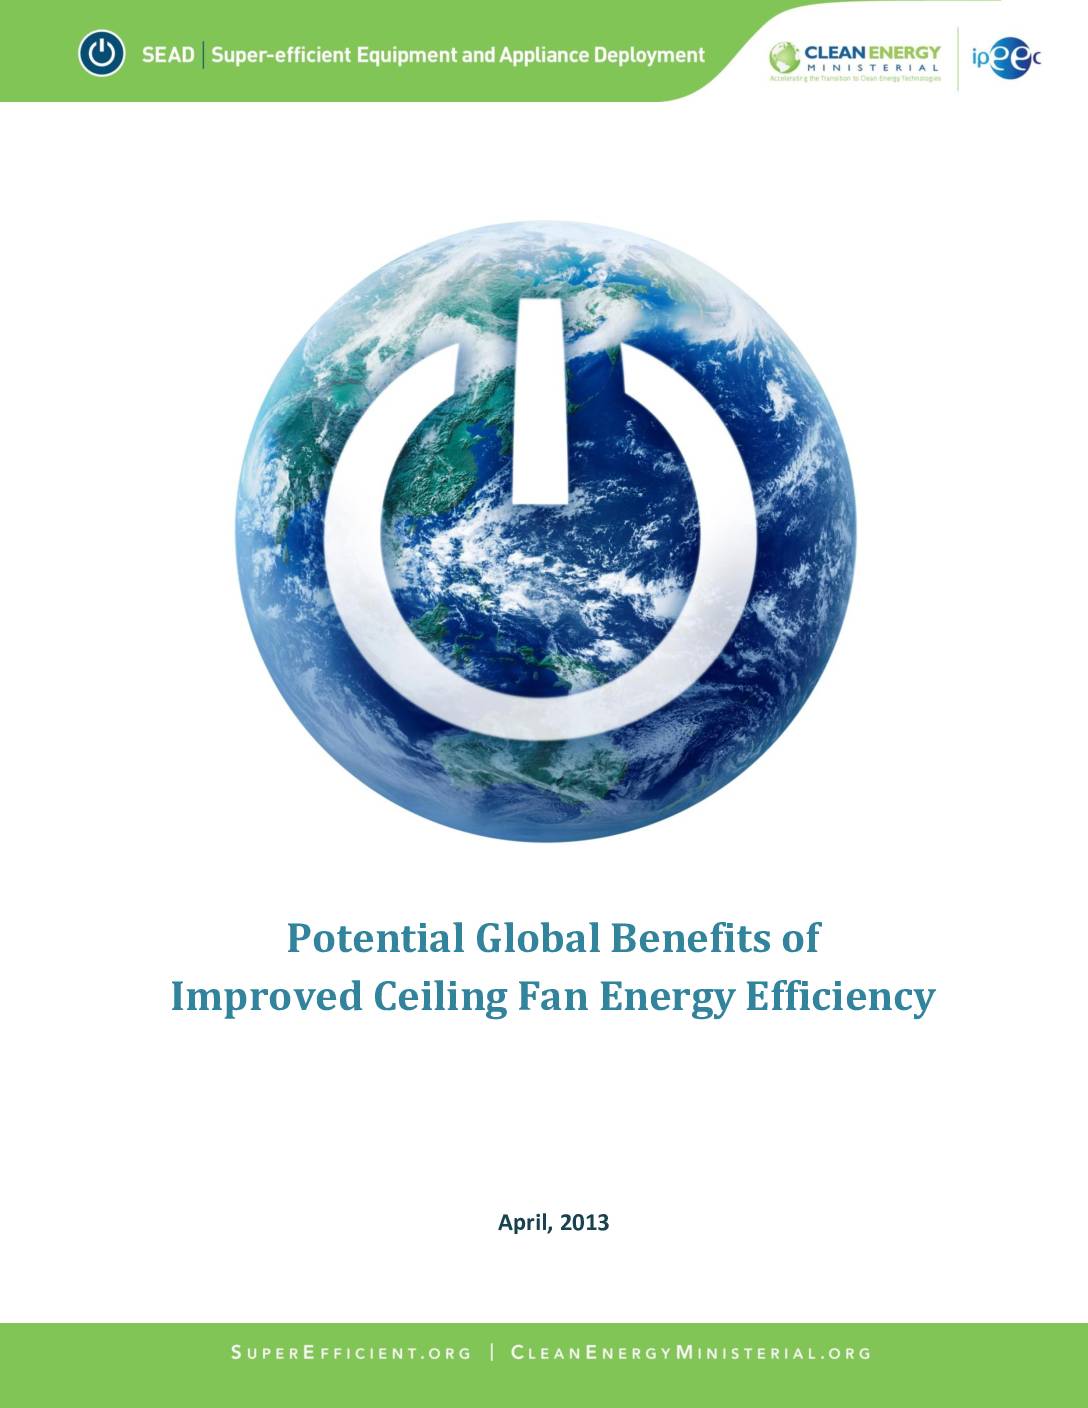 Potential Global Benefits of Improved Ceiling Fan Energy Efficiency